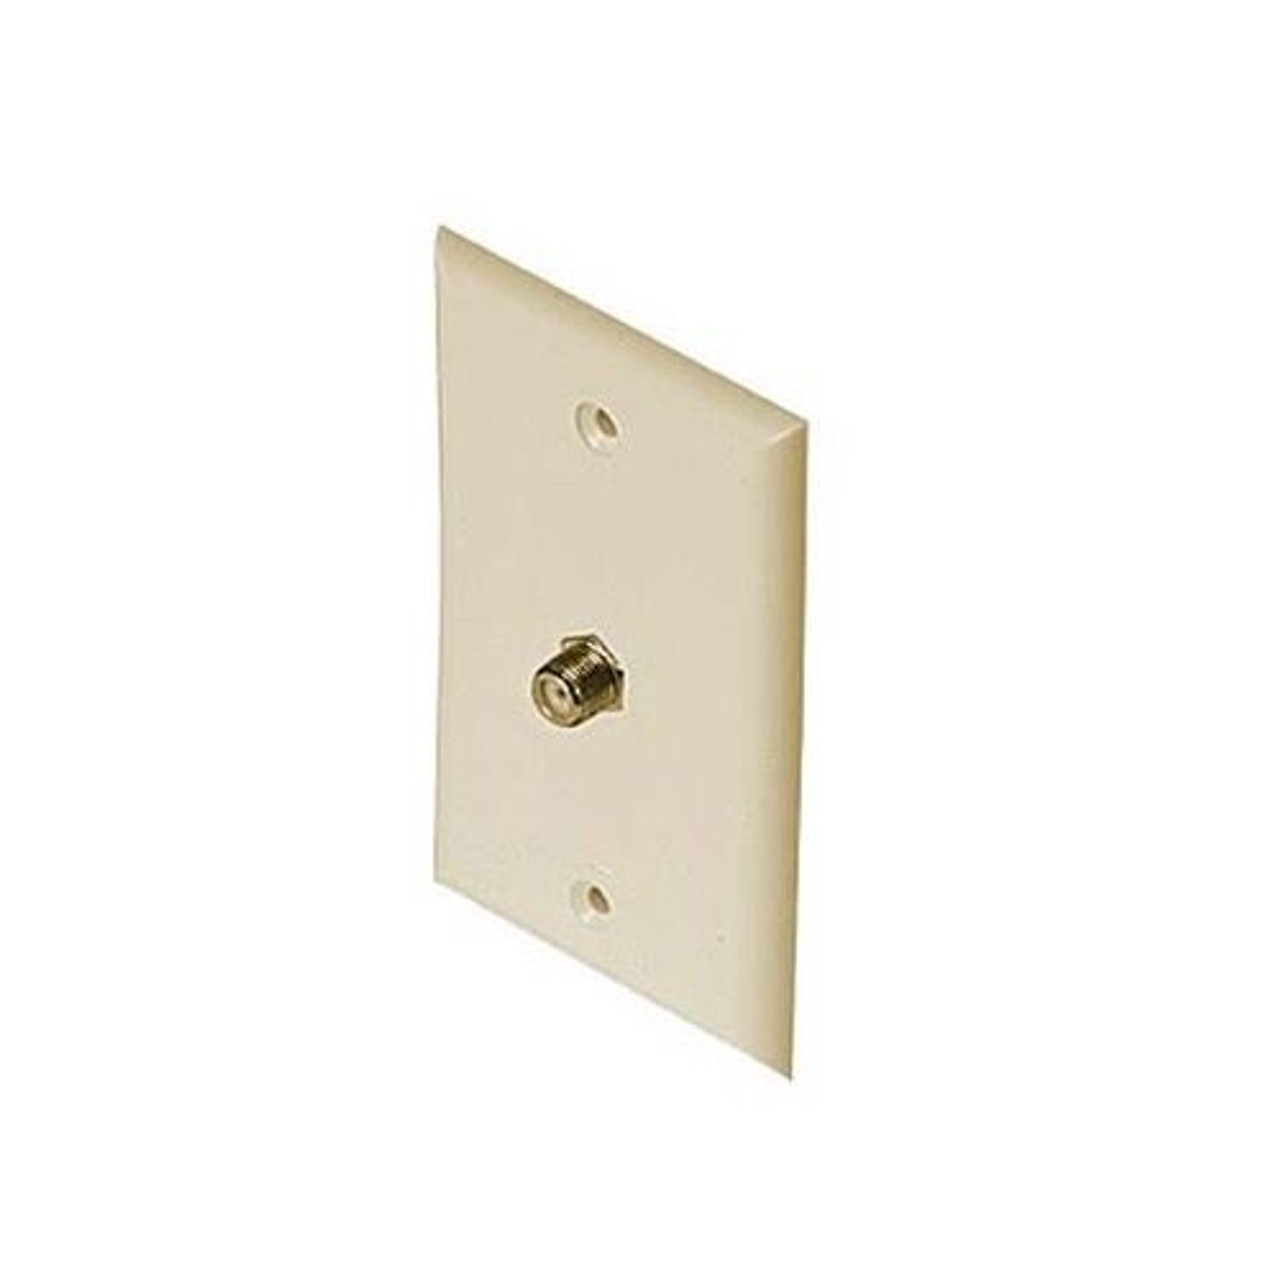 F-81 Wall Plate Ivory Gold Series Coax Cable Philips M61022 75 Ohm Jack TV Video Digital Antenna Satellite Signal Single Port Flush Mount Outlet Cover Plug, Part # M-61022